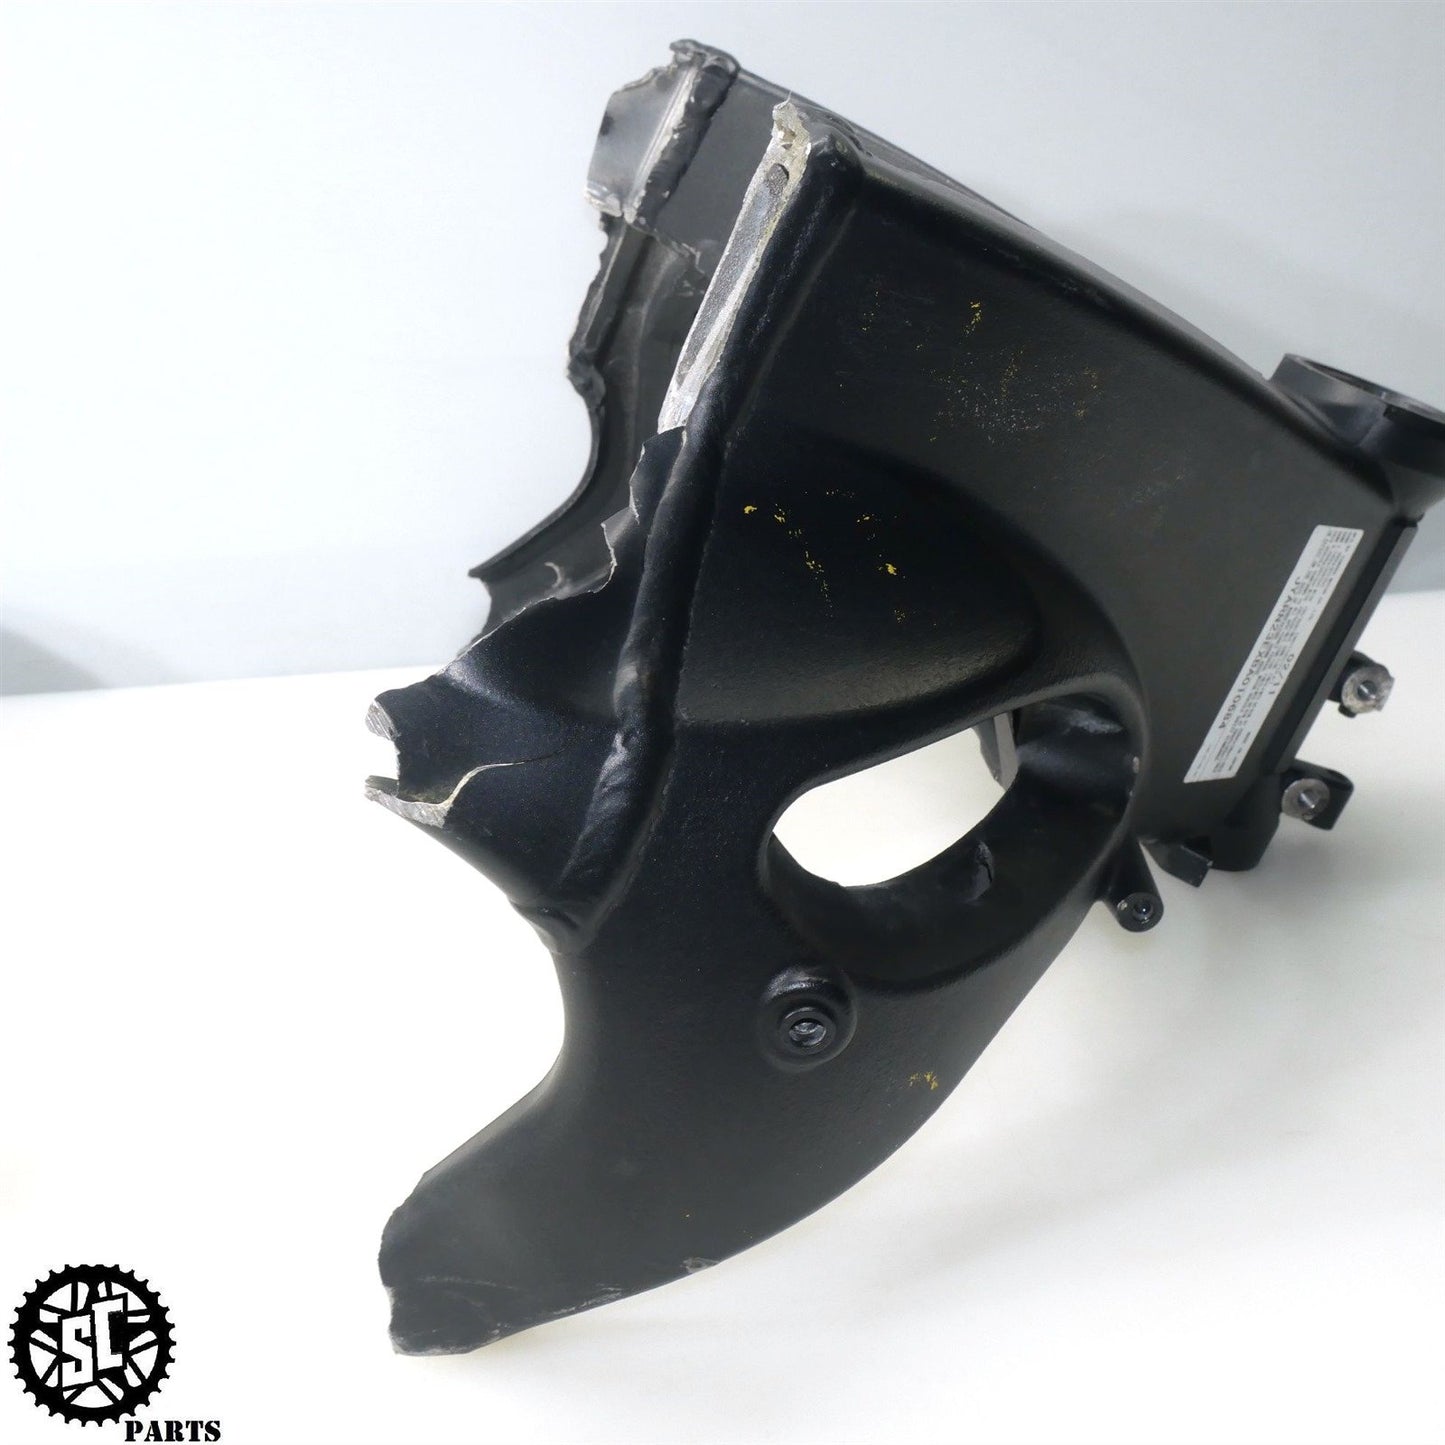 09-14 YAMAHA YZF R1 MAIN FRAME CHASSIS *S* Y39 2011